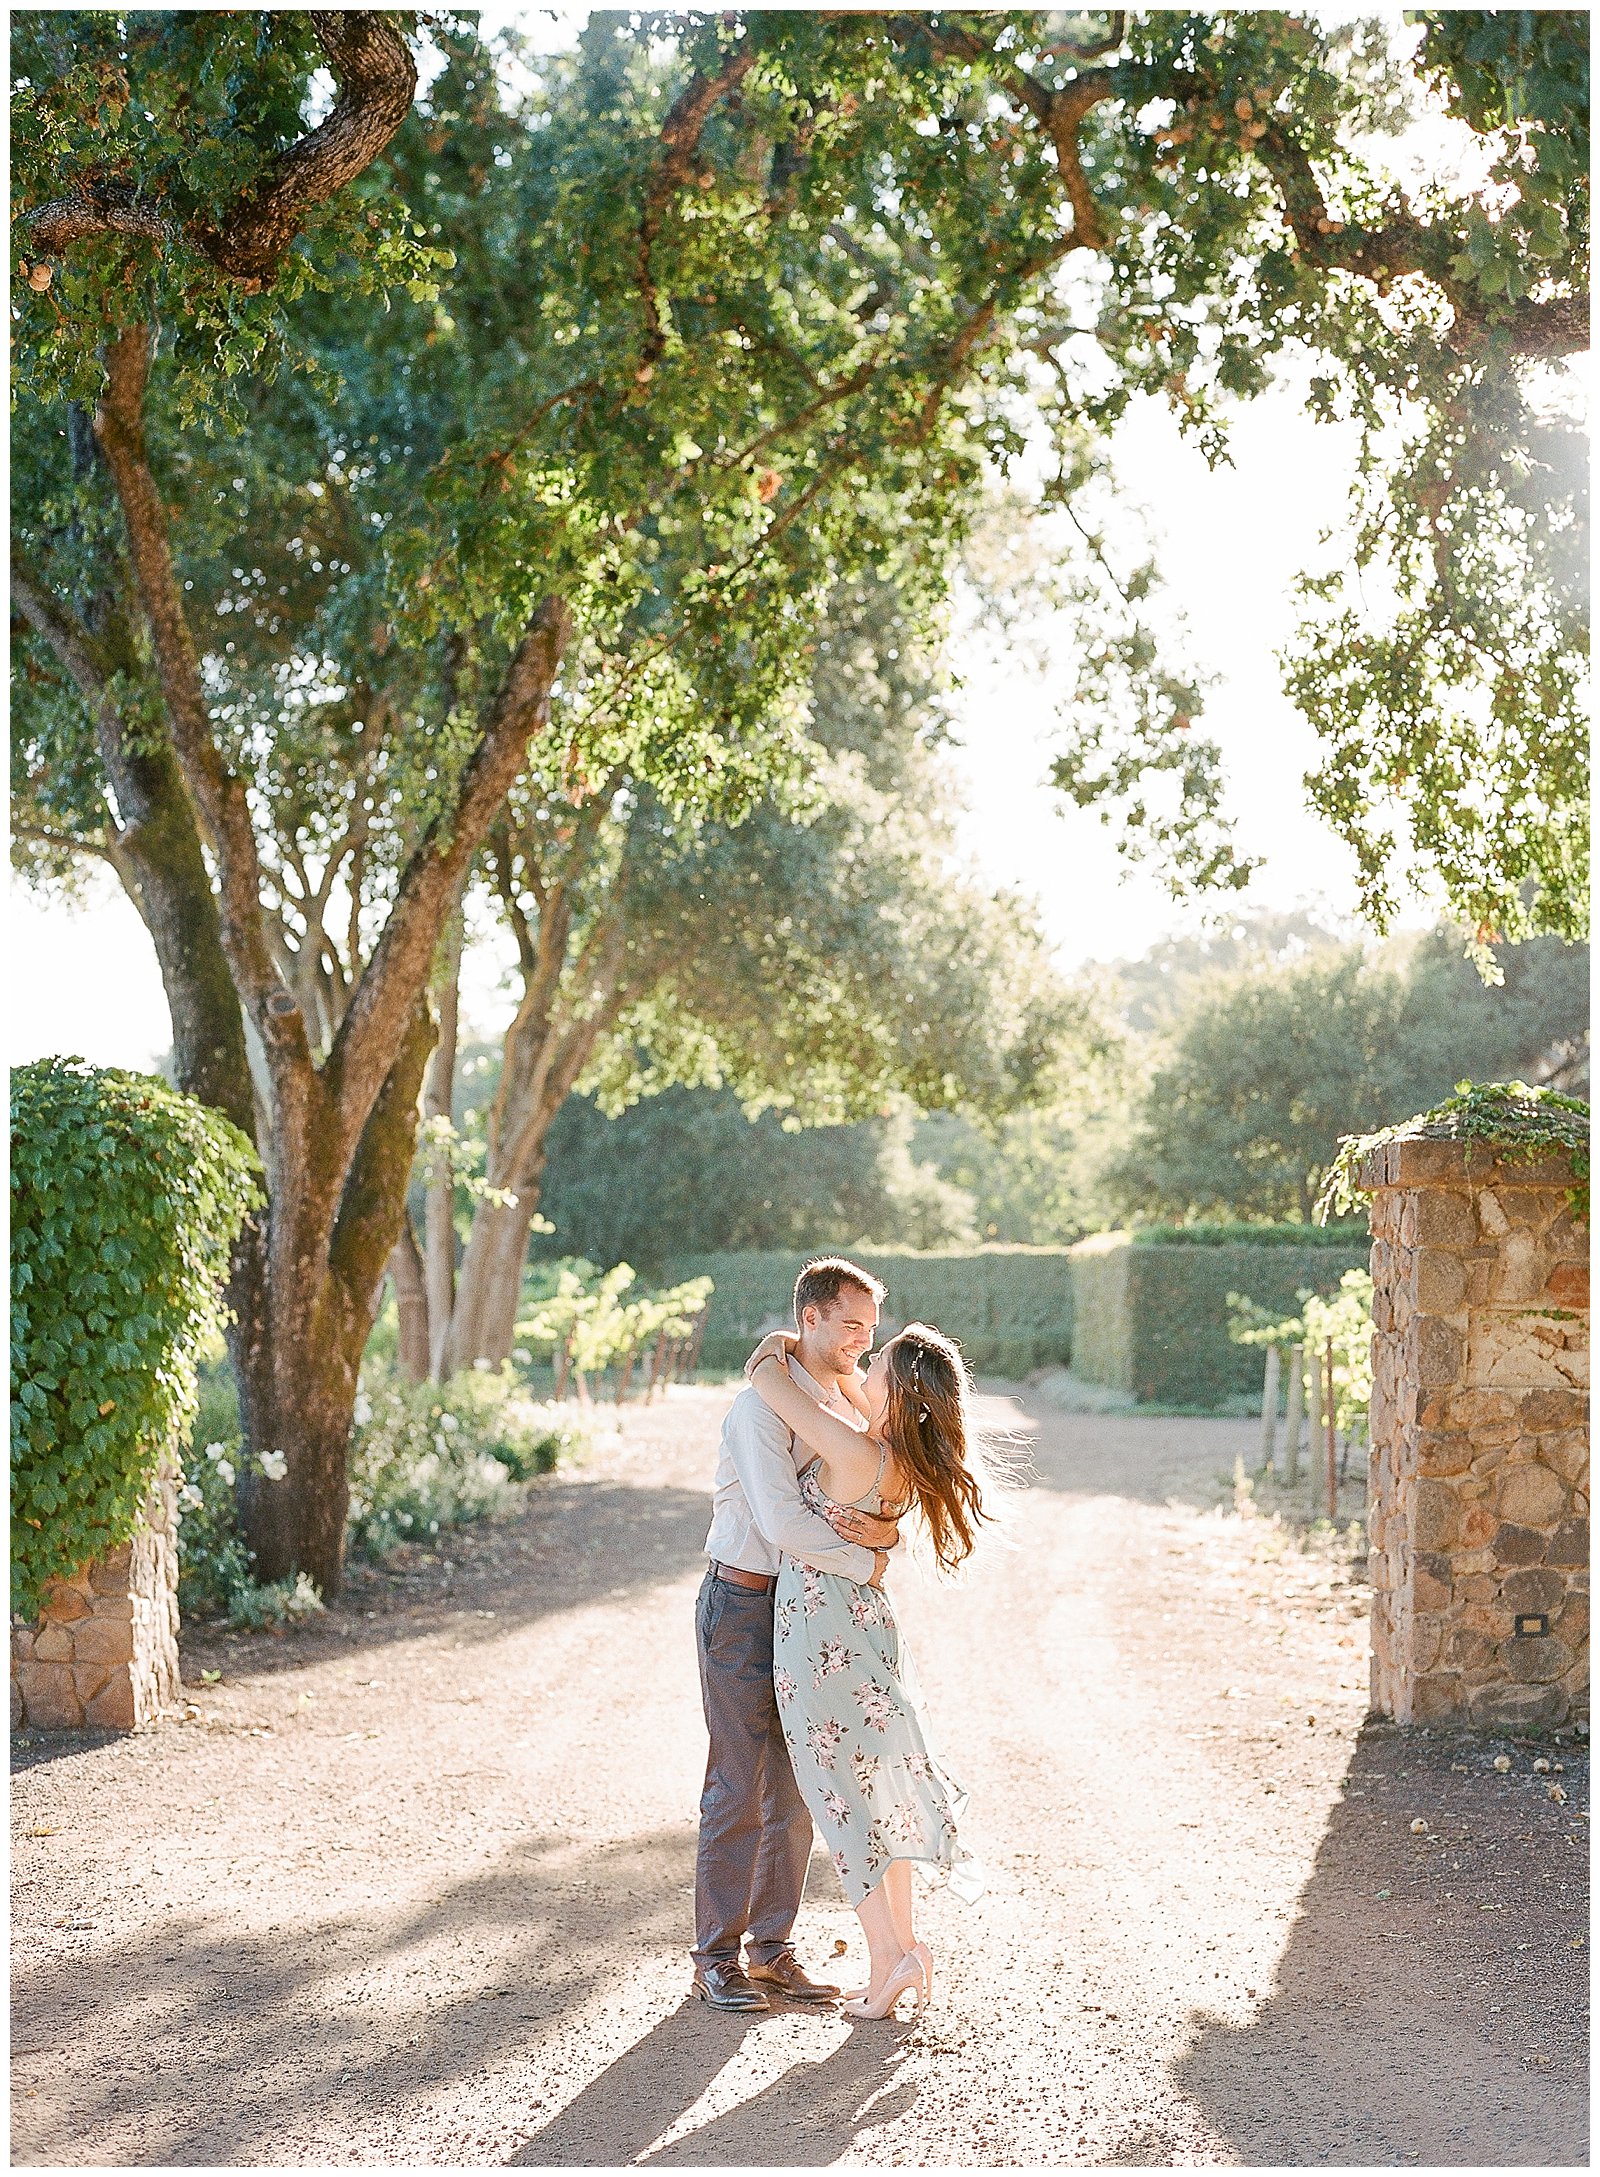 Engagement photos in Napa Valley || The Ganeys